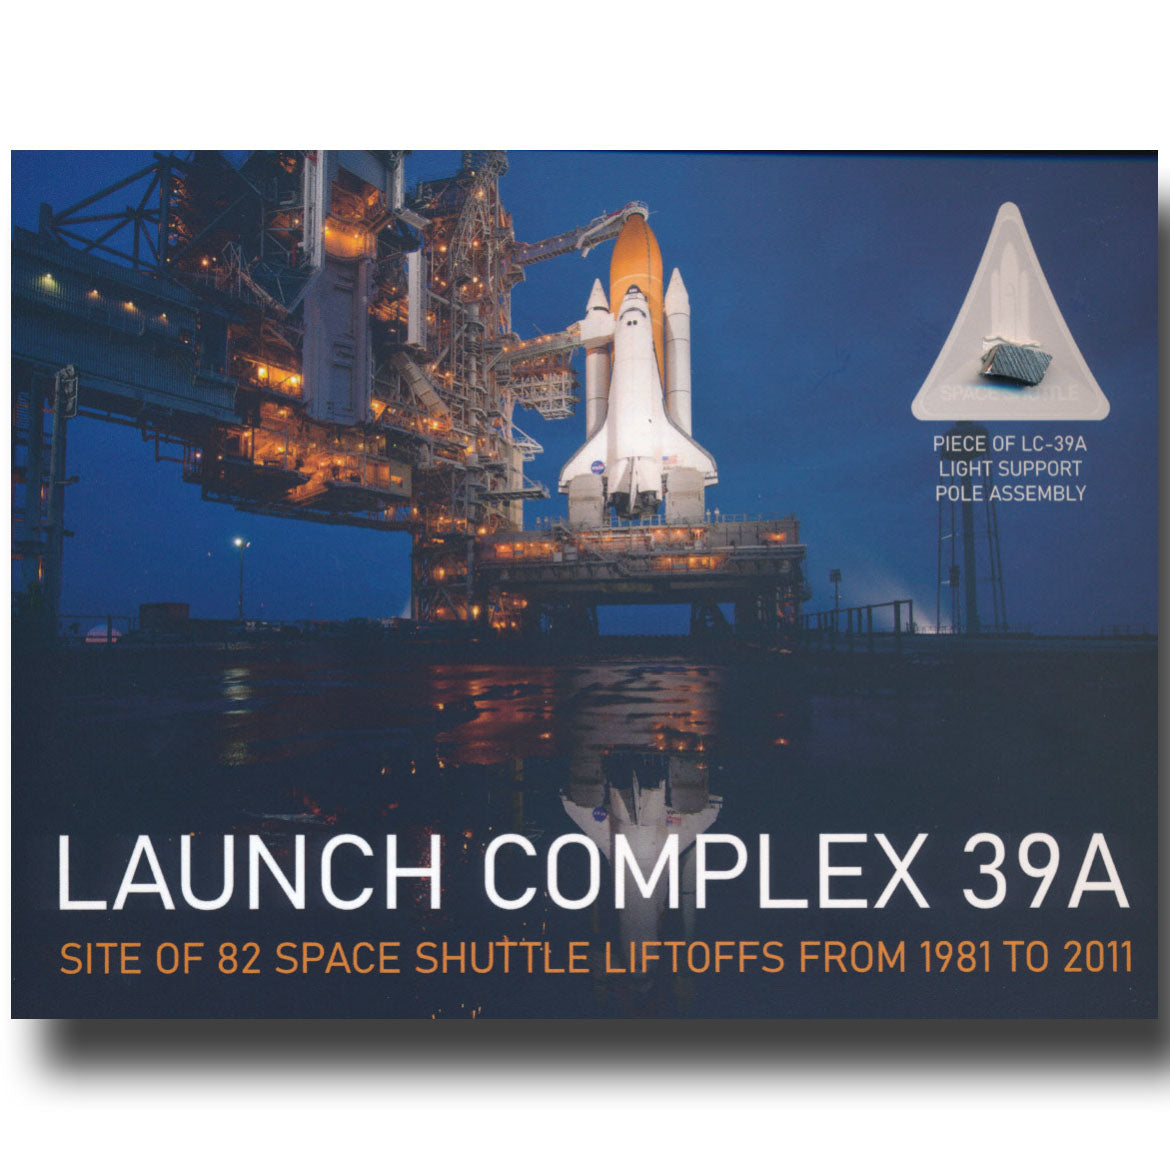 Launch Complex 39A relic presentation - site of 82 Shuttle launches!